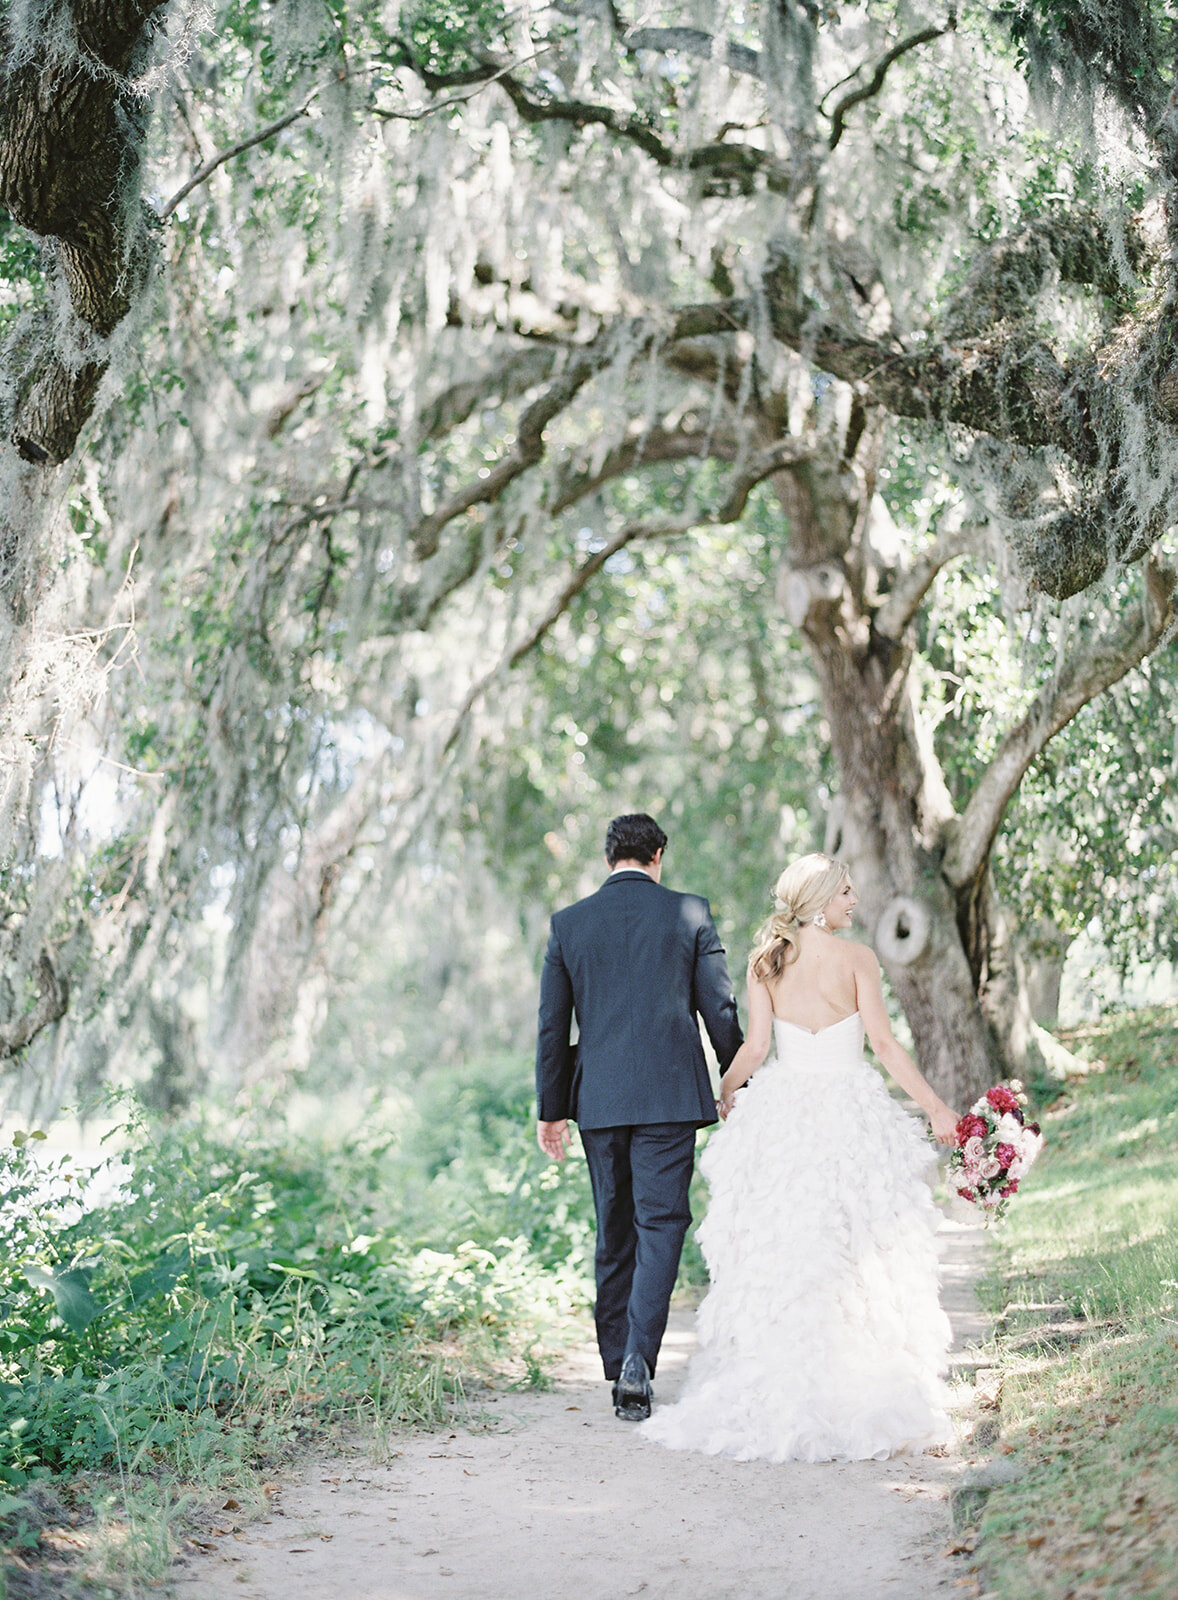 Couple under oak trees walking down path. Groom is in a black tux and bride is in a strapless gown with feathers as a skirt designed by Anne Barge. Photographed by wedding photographers in Charleston Amy Mulder Photography